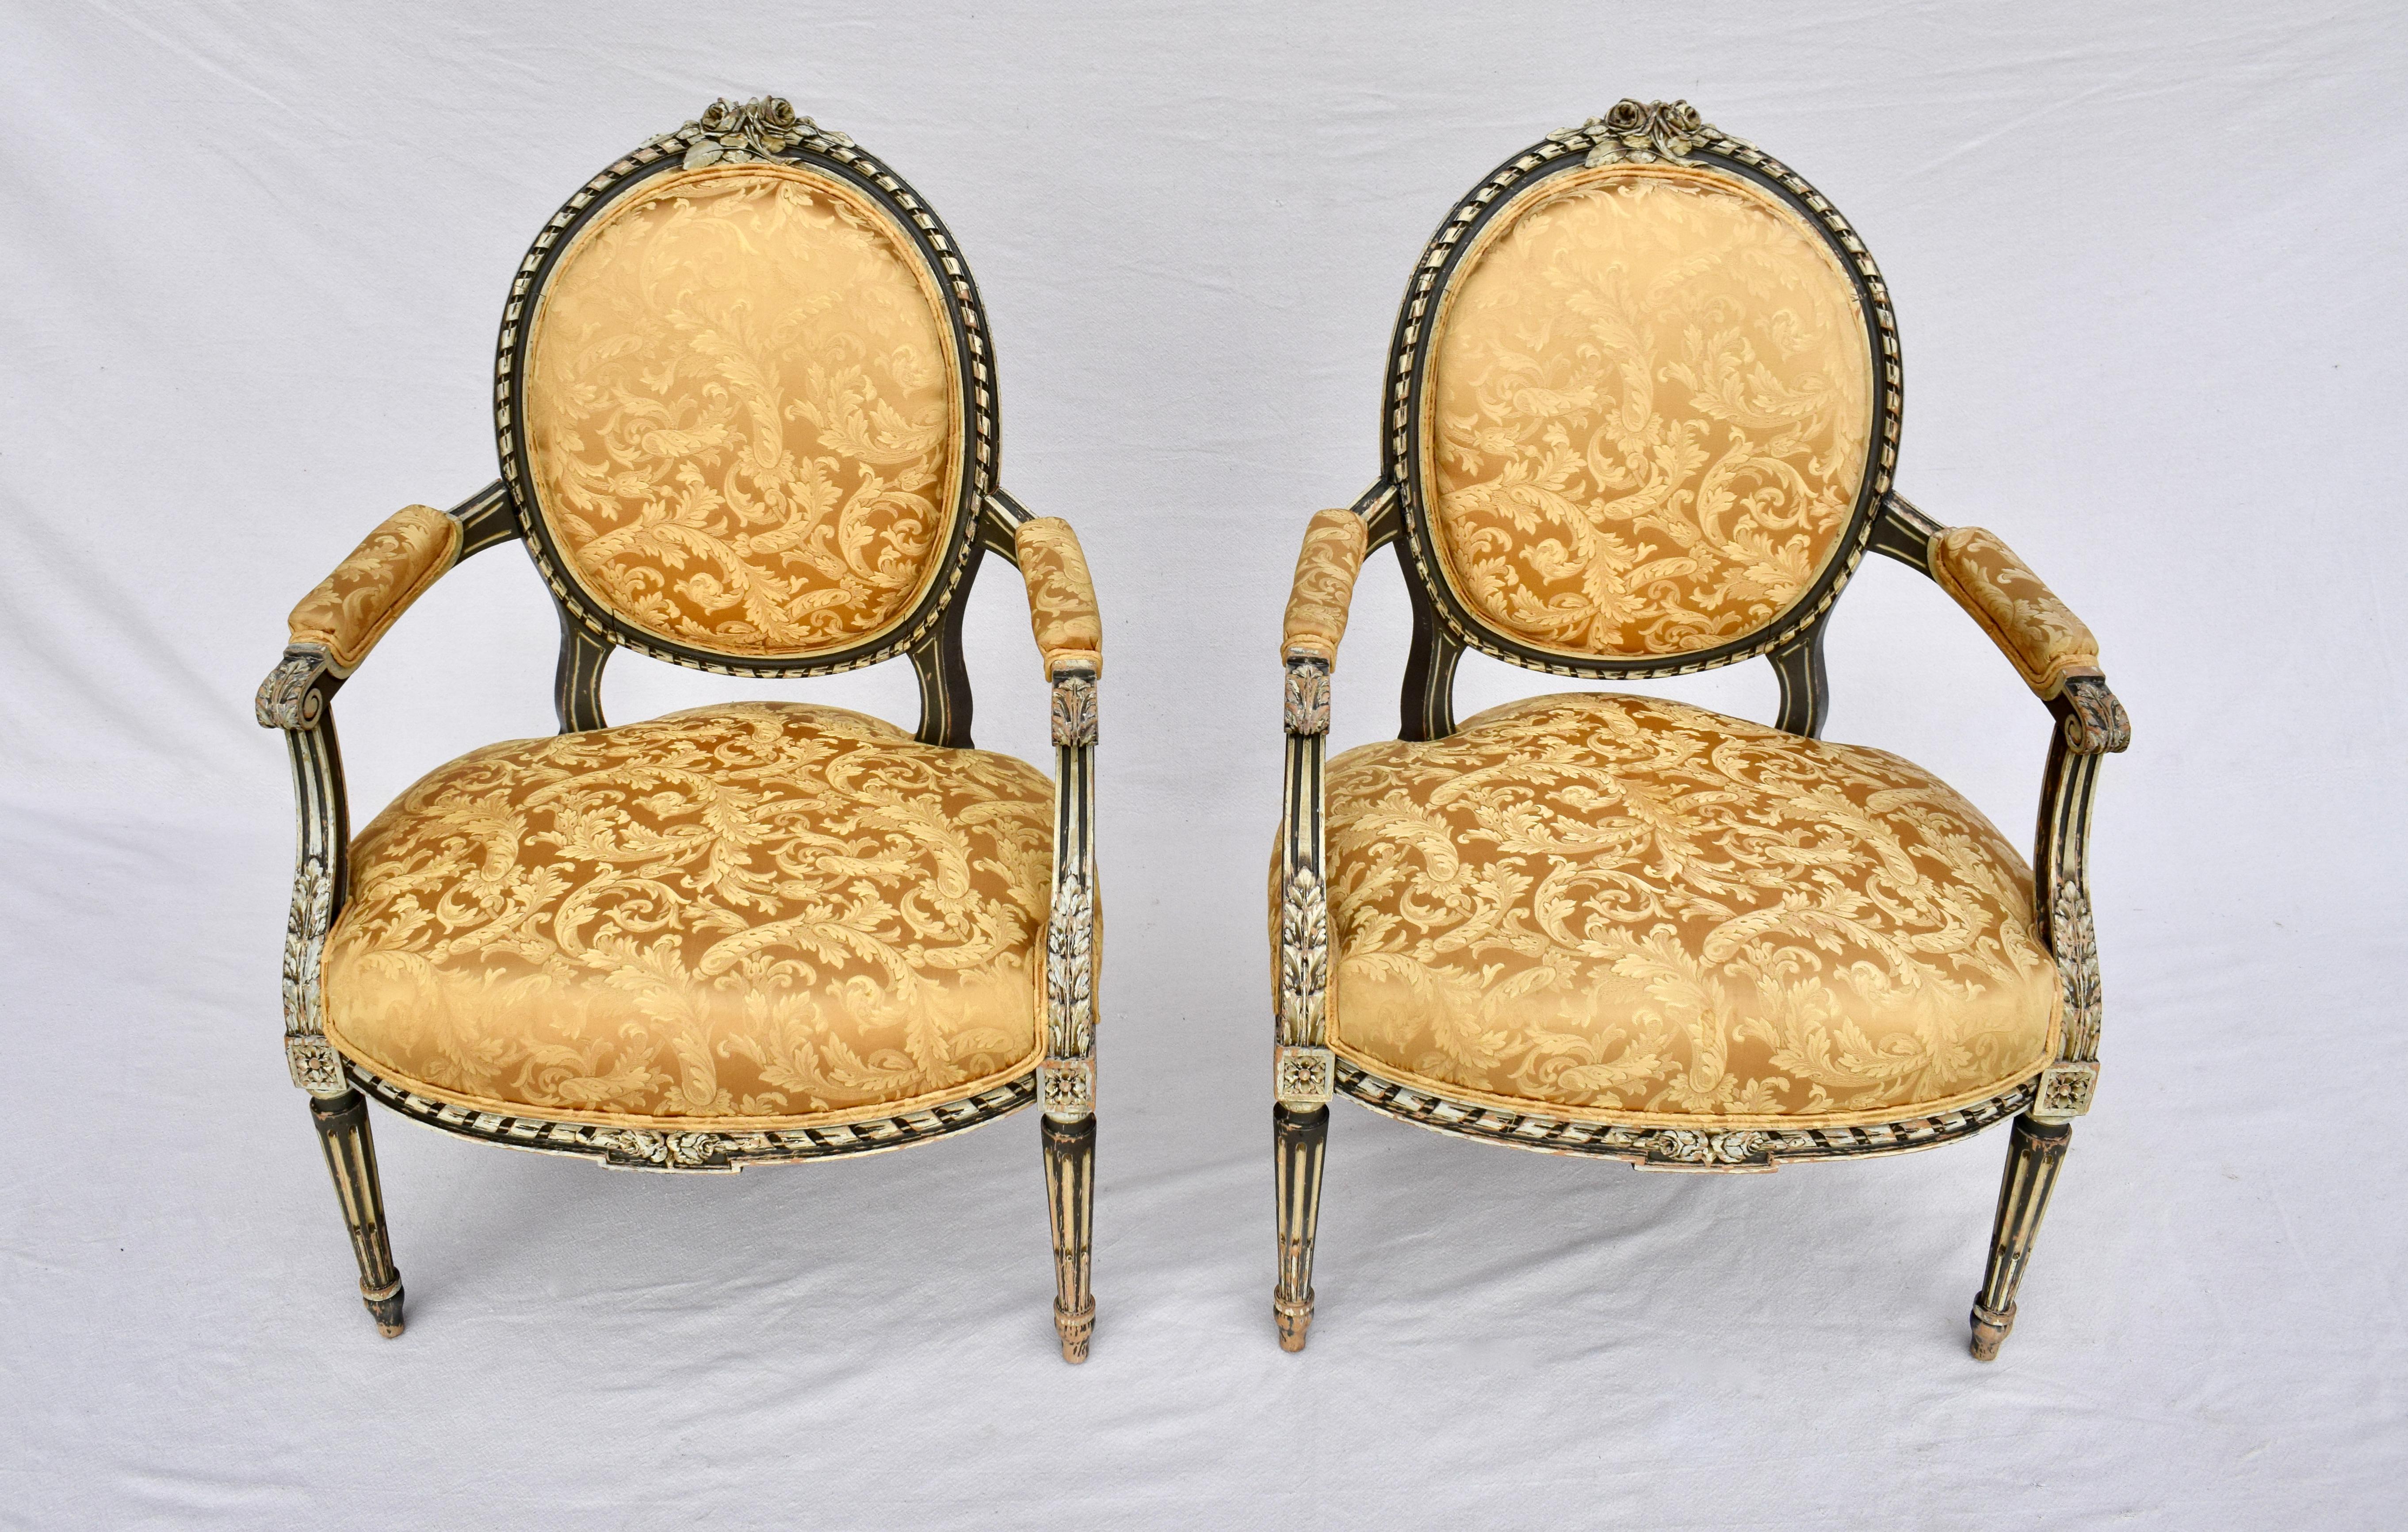 A pair of early 20th C. French Louis Xvi style open arm Fauteuils with exquisite carvings throughout and reinforced joinery. The Canary Gold Damask Upholstery is in lovely vintage condition with some signs of wear to the seats. Seat Height: 20.5